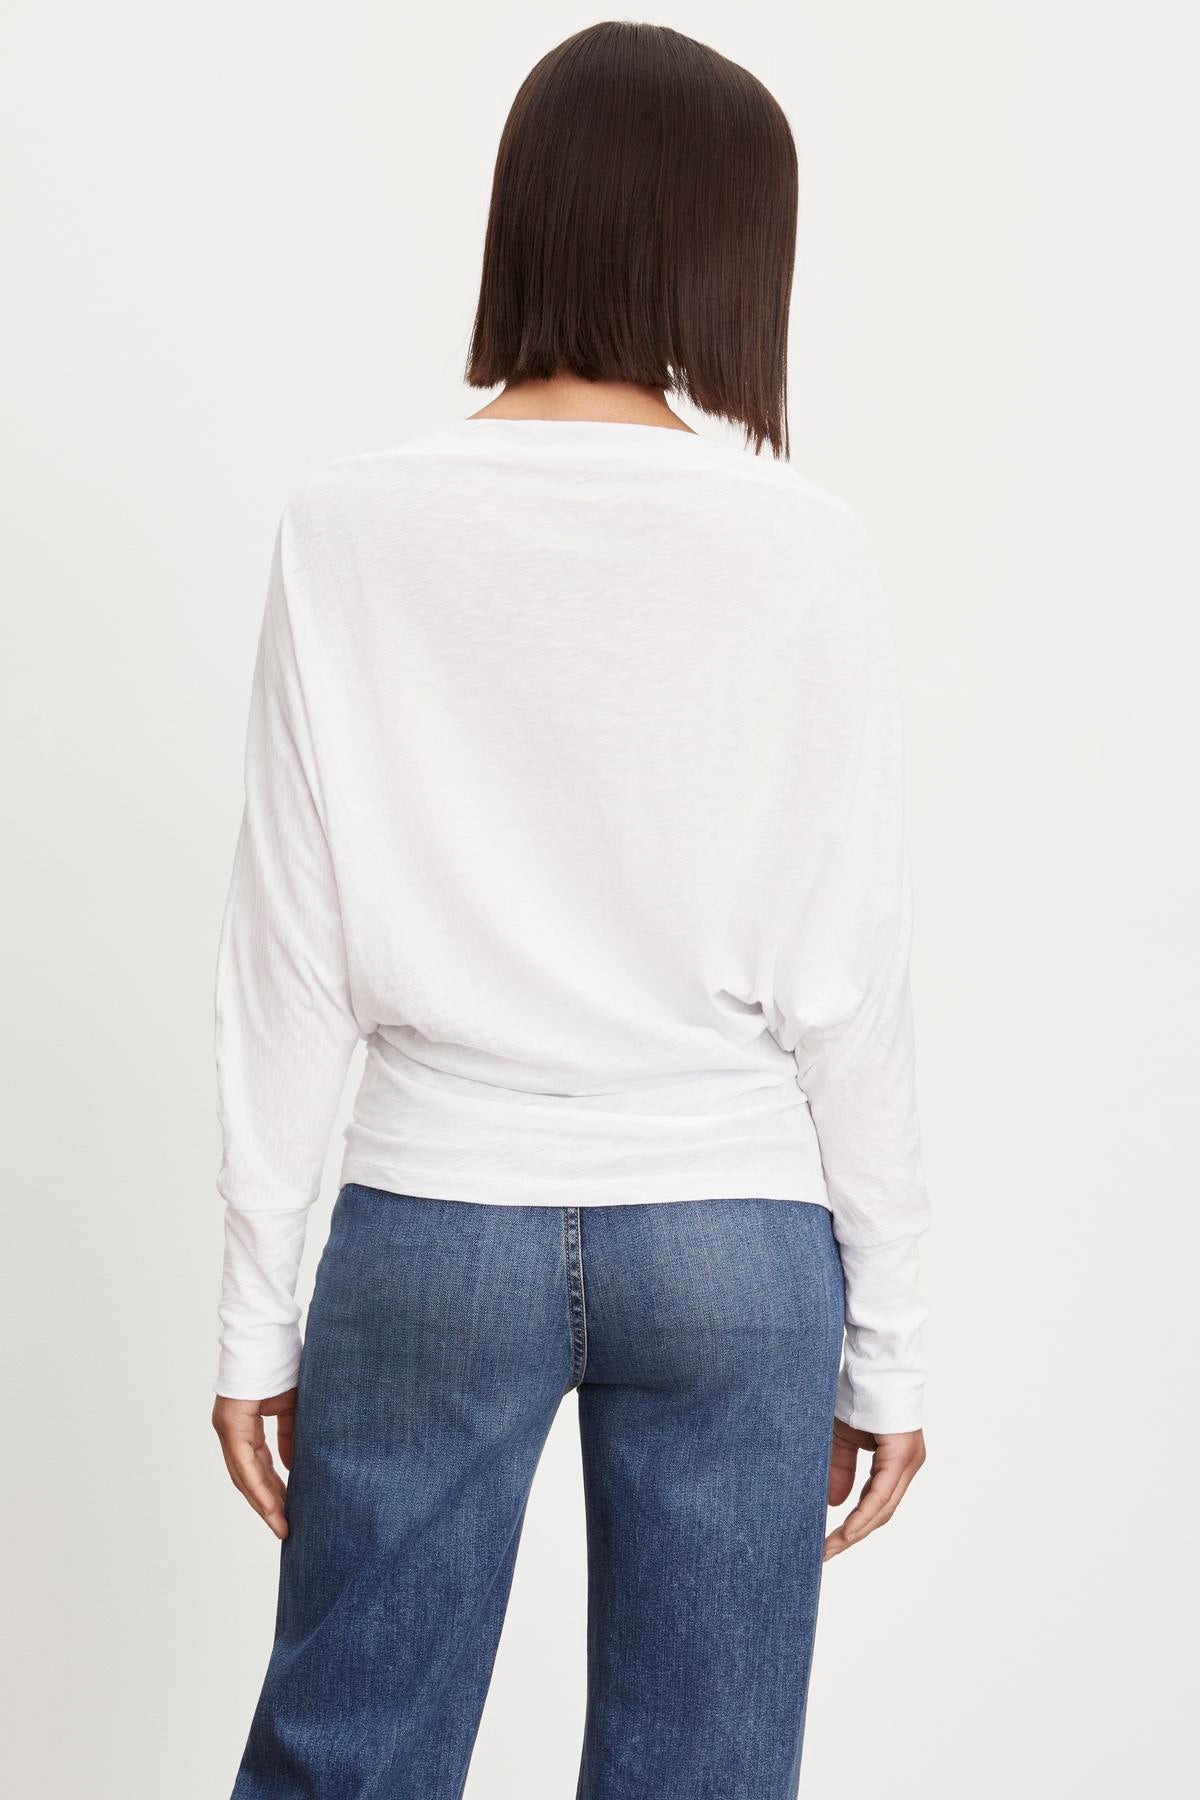 The view of a woman wearing Velvet by Graham & Spencer's NOVALEE DOLMAN TEE jeans and a white long sleeve top.-35701726675137